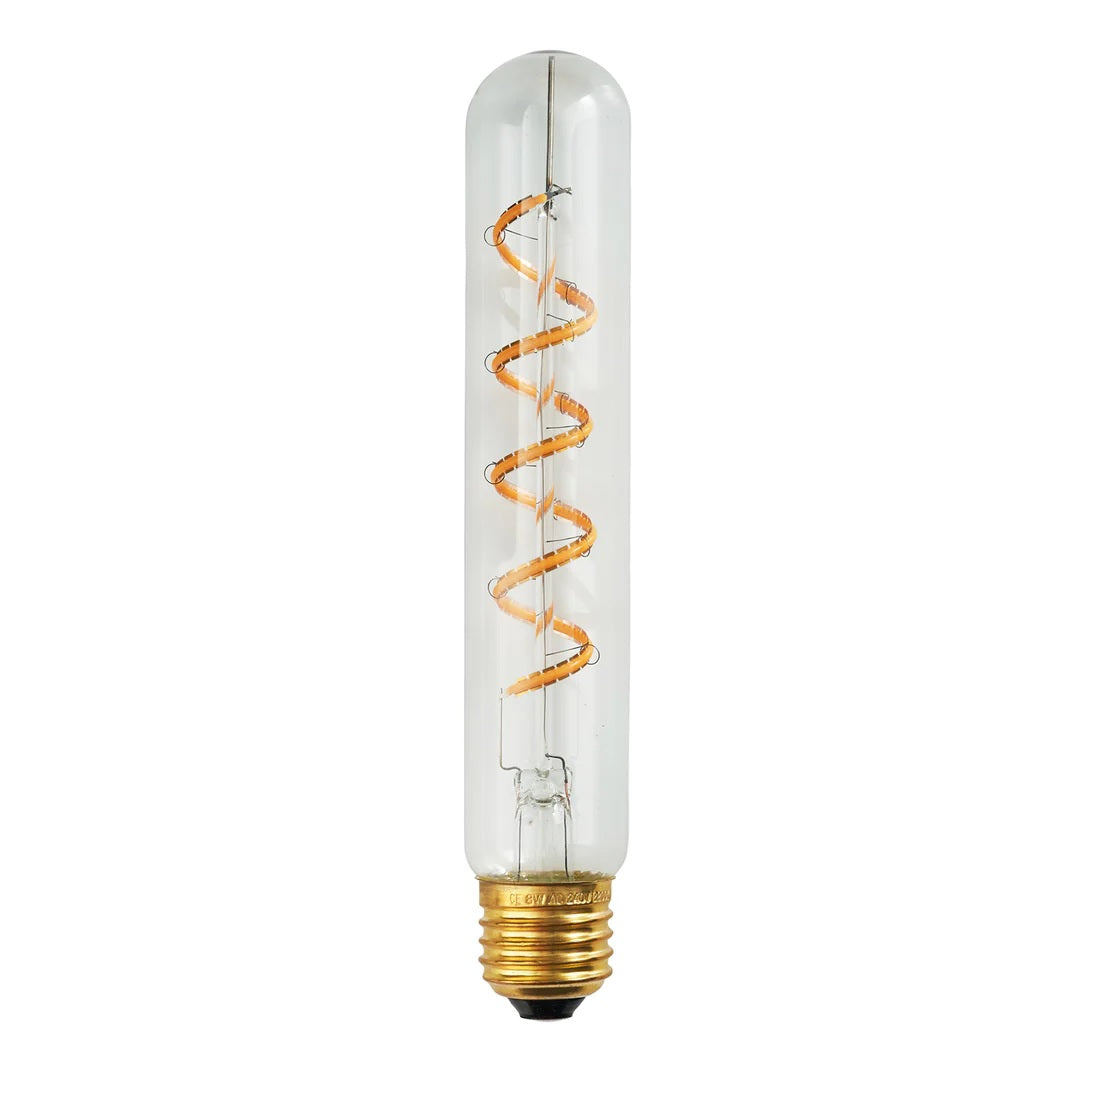 The Flo T30 LED light bulb E27 is a high quality handmade light bulb offering a five year warranty and is sold by South Charlotte Fine Lighting